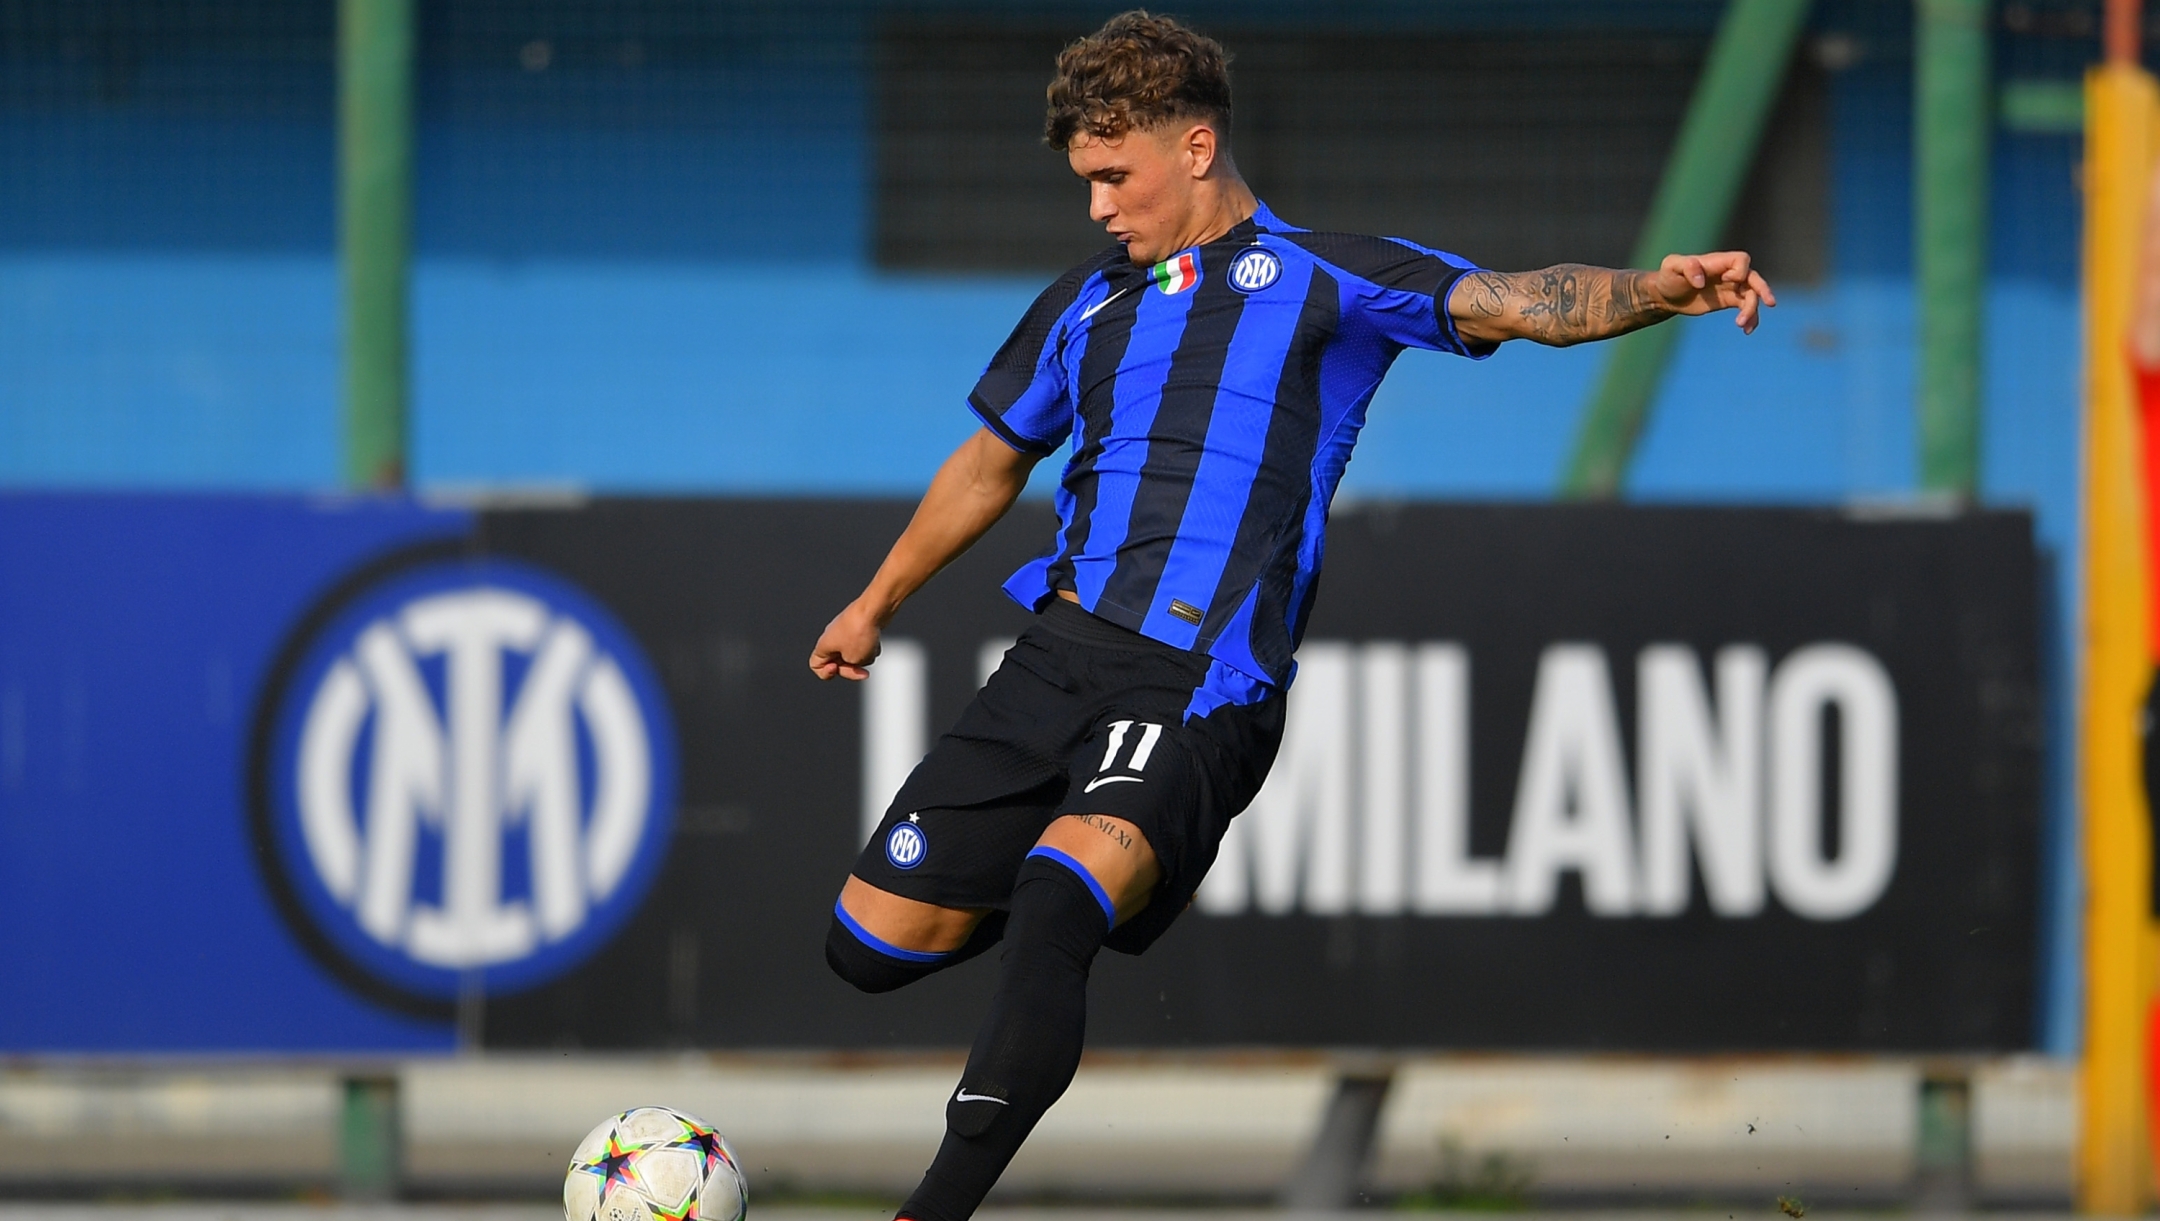 SESTO SAN GIOVANNI, ITALY - OCTOBER 26: Kevin Zefi of FC Internazionale shots during the UEFA Youth League match between FC Internazionale and Viktoria Plzen at Stadio Breda on October 26, 2022 in Sesto San Giovanni, Italy. (Photo by Mattia Pistoia - Inter/Inter via Getty Images)